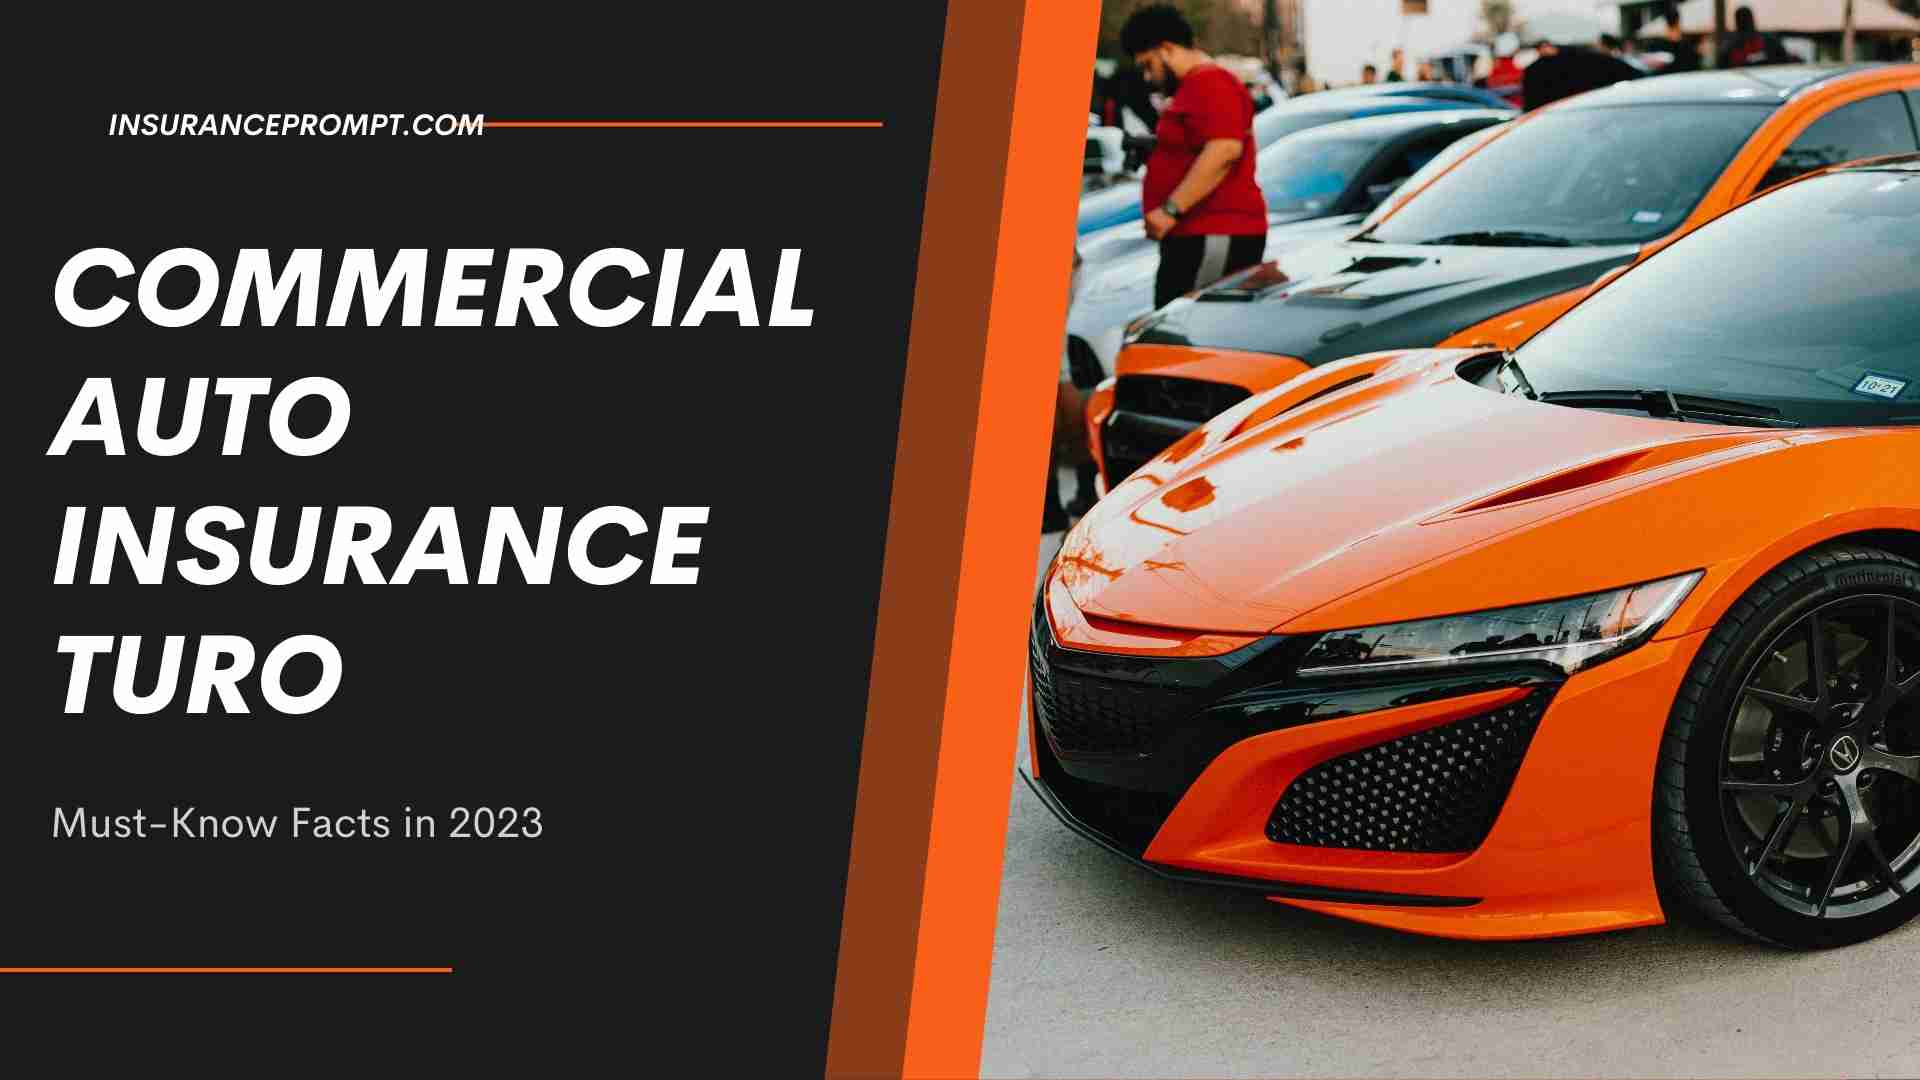 Commercial Auto Insurance Turo: Must-Know Facts in 2023